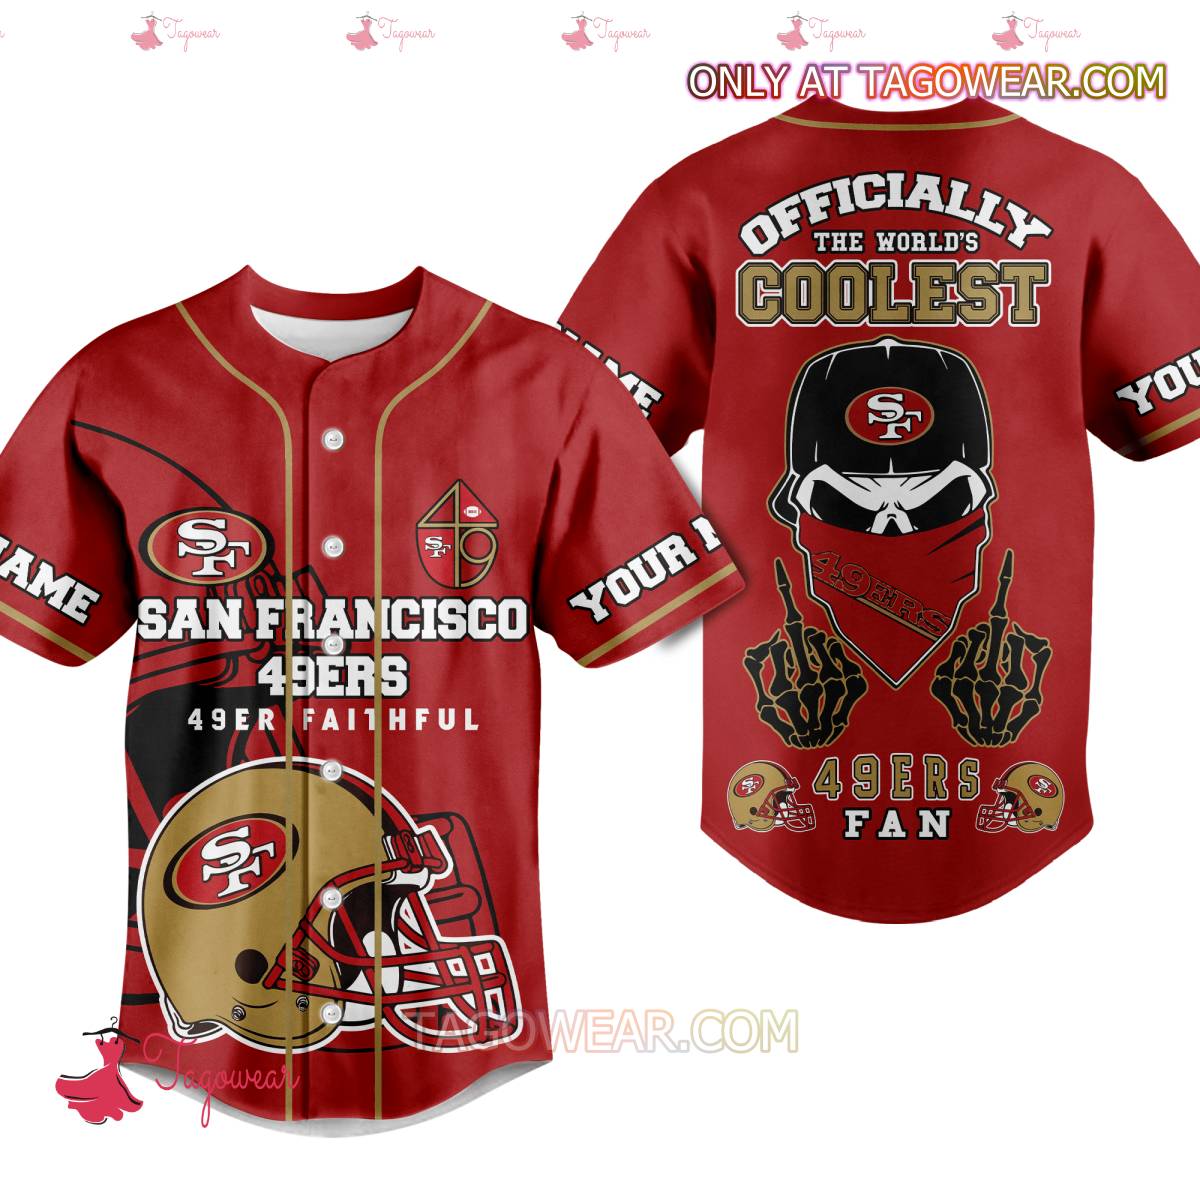 San Francisco 49ers Officially The World's Coolest Personalized Baseball Jersey